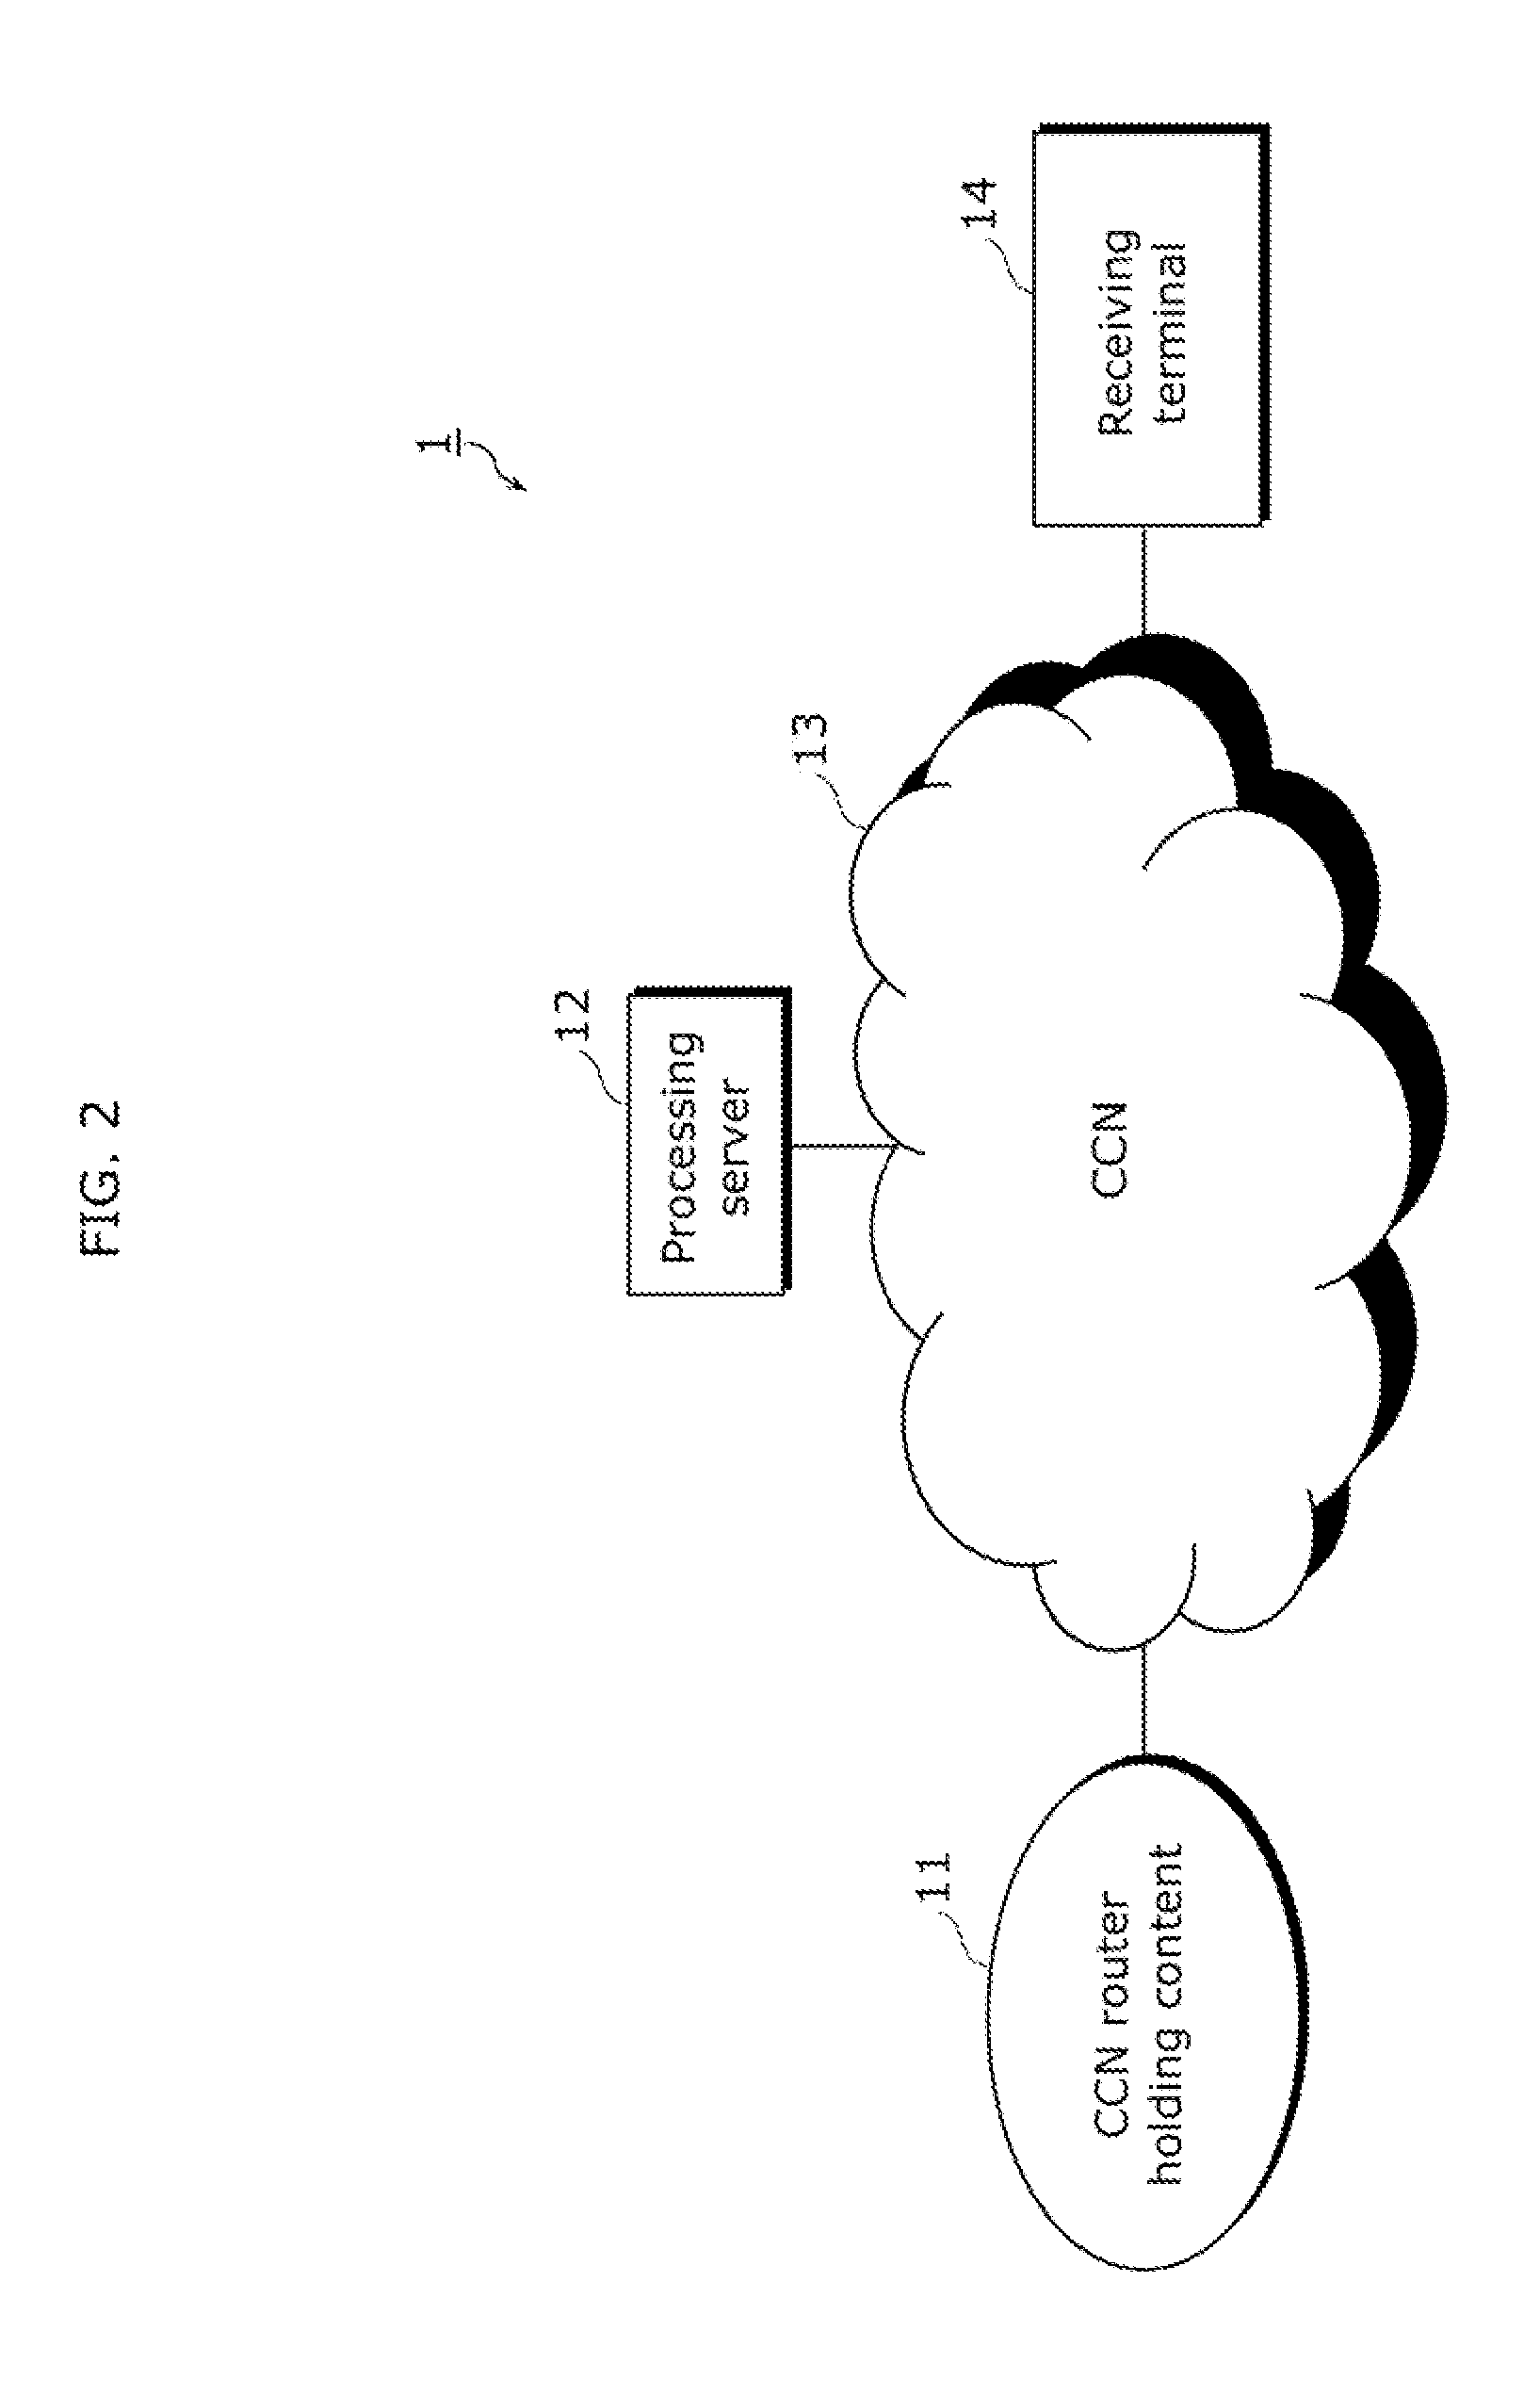 Server, router, receiving terminal, and processing method